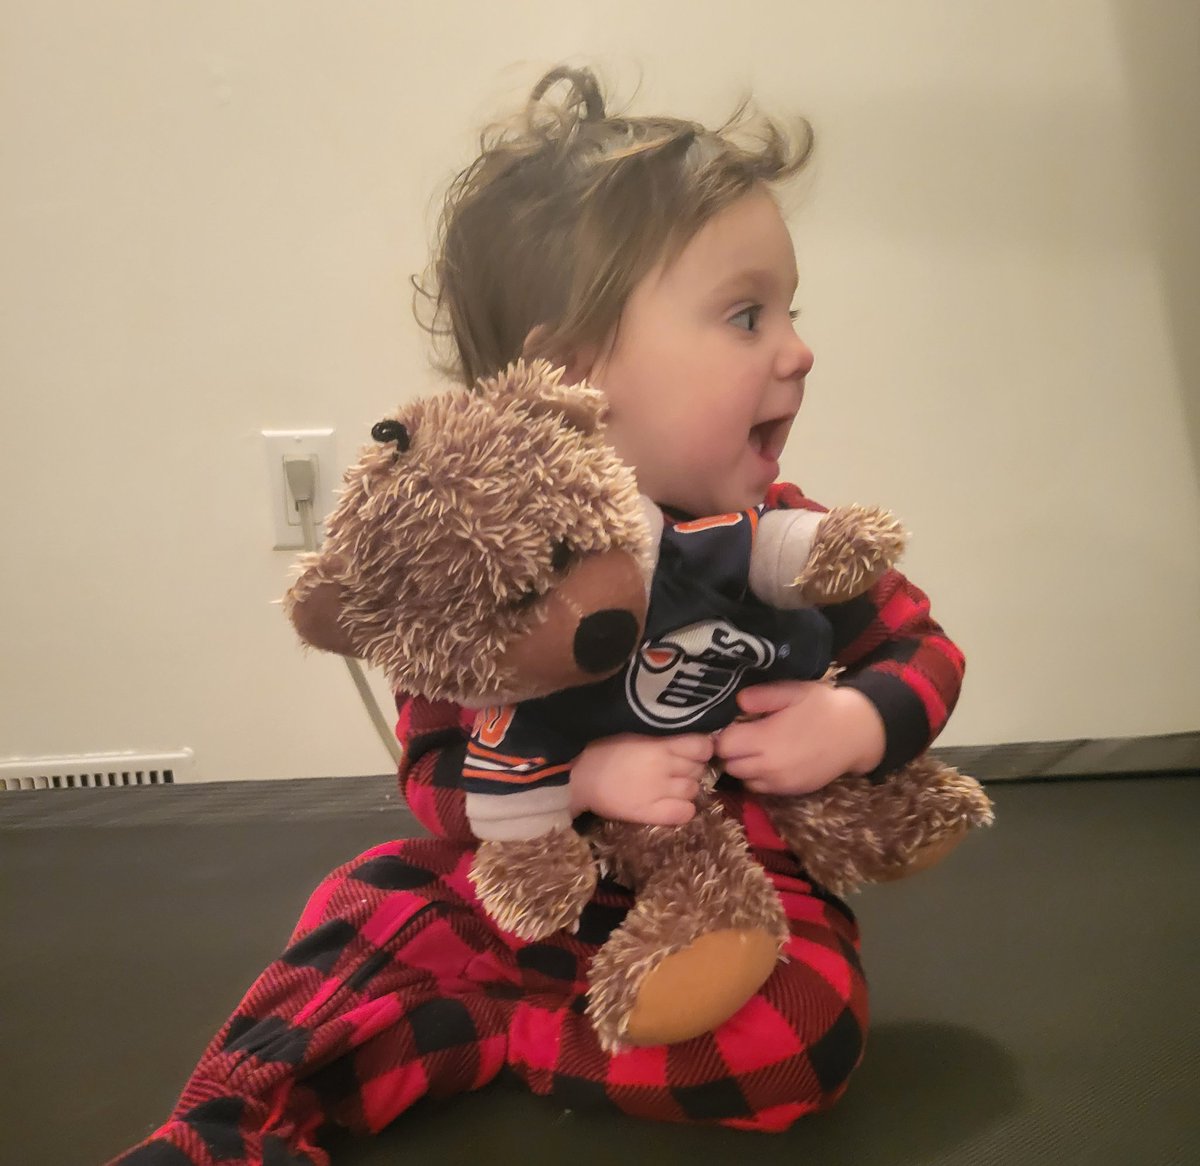 Hope you all experience even a fraction of this joy today, Merry Christmas from the little lady and Olive the Oilers' bear.